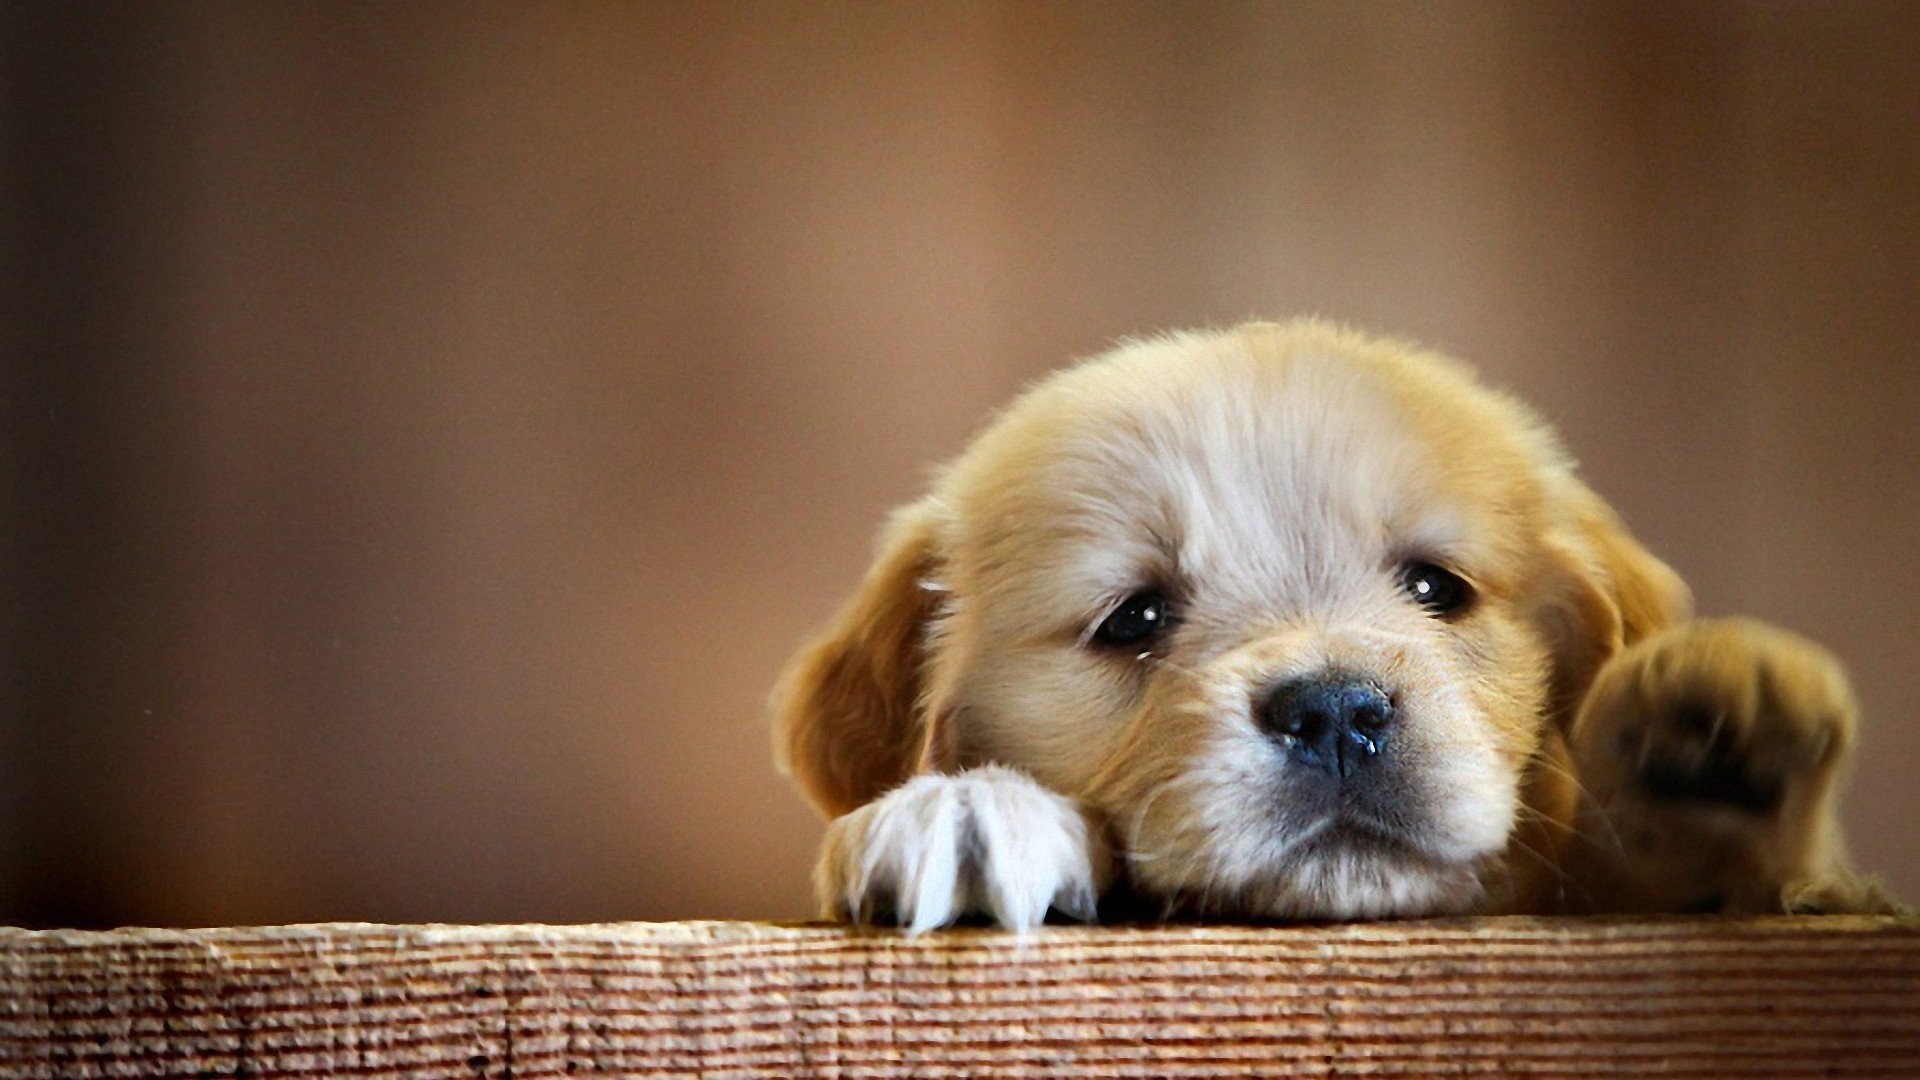 1920x1080 Cute Baby Dog Wallpaper (11 Wallpapers)